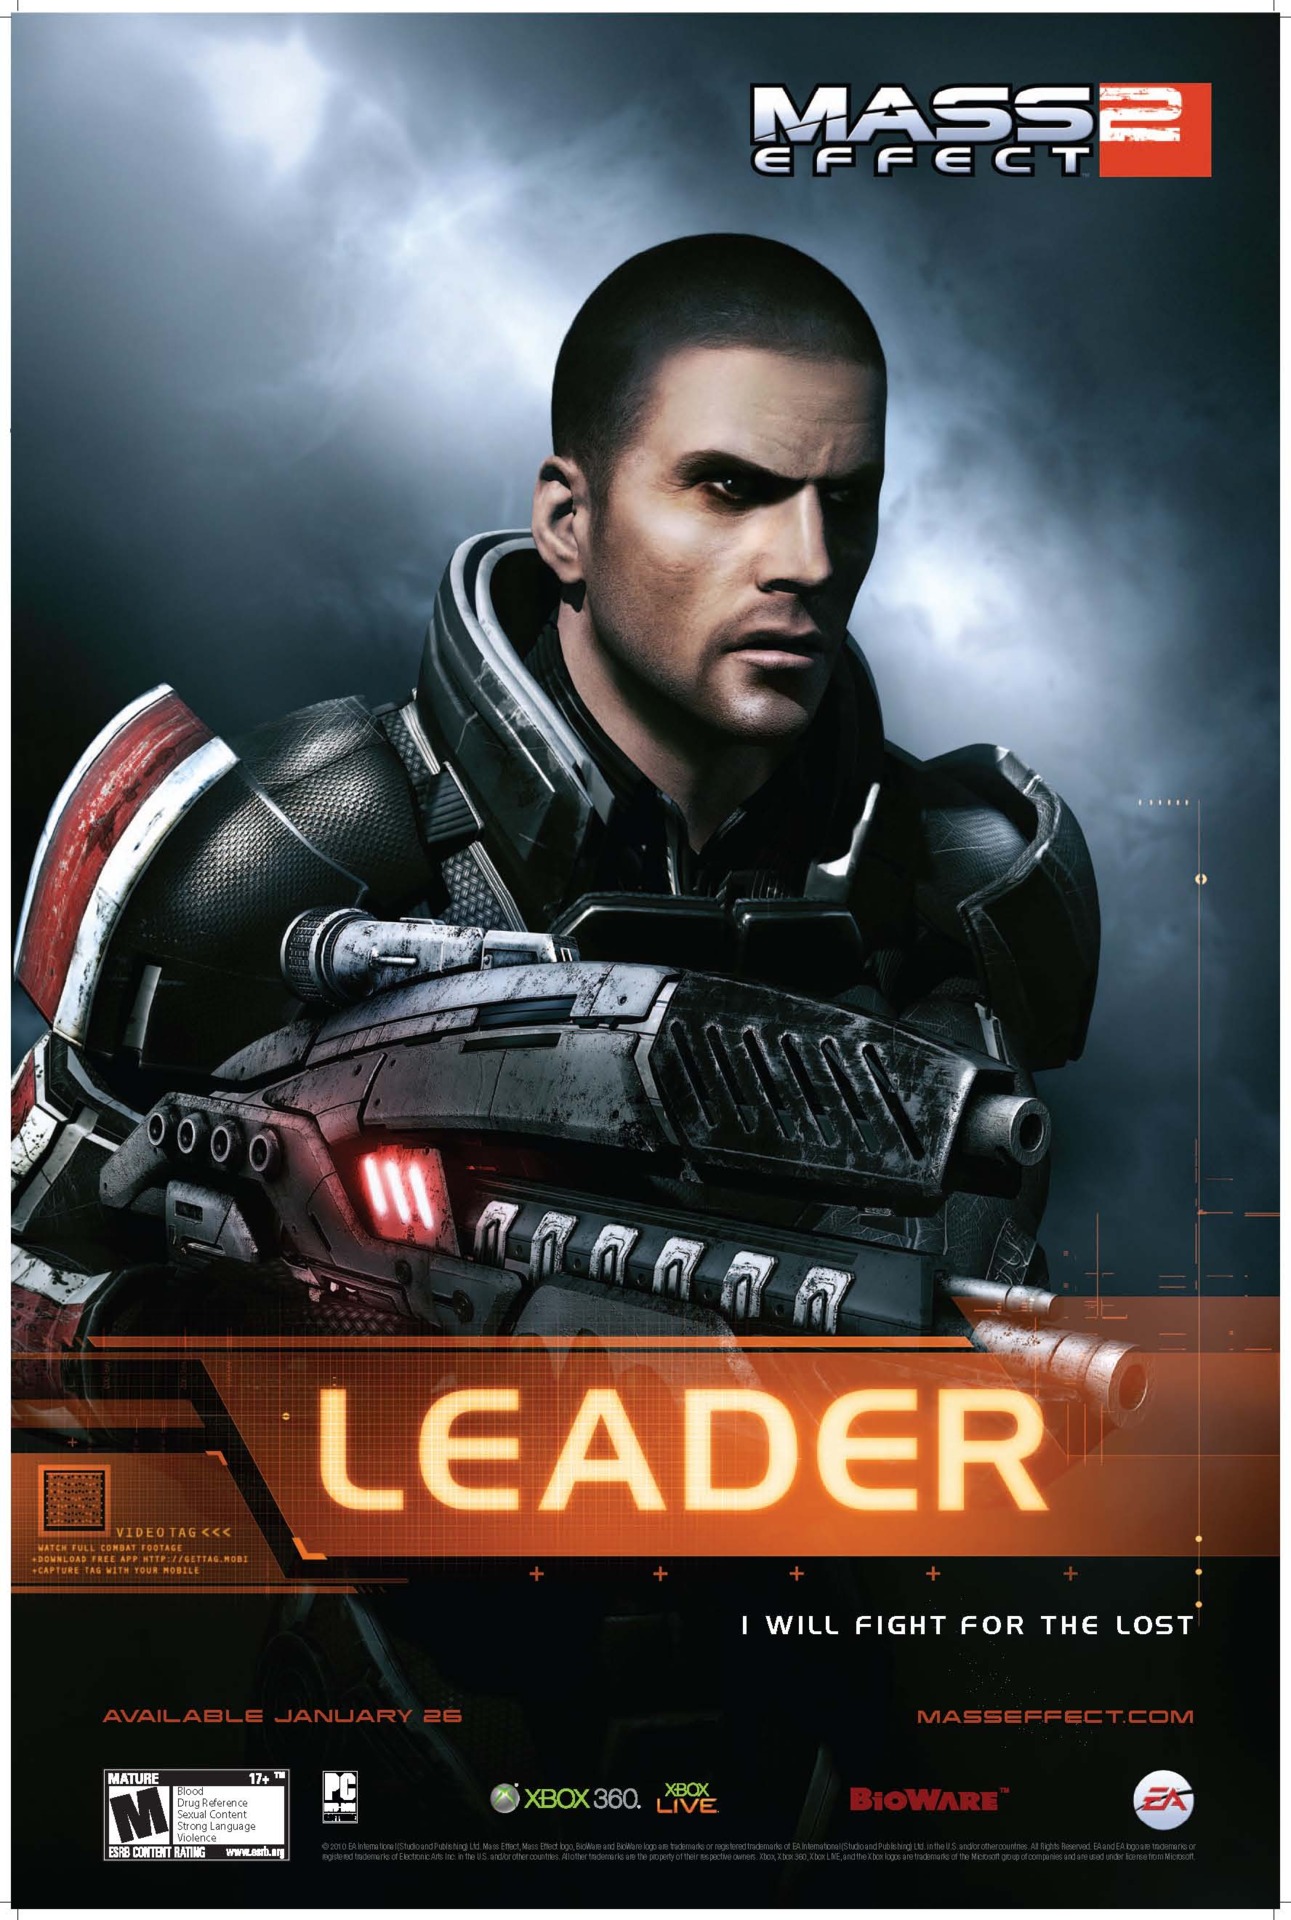 Everything rests on Shepards shoulders in Mass Effect 3